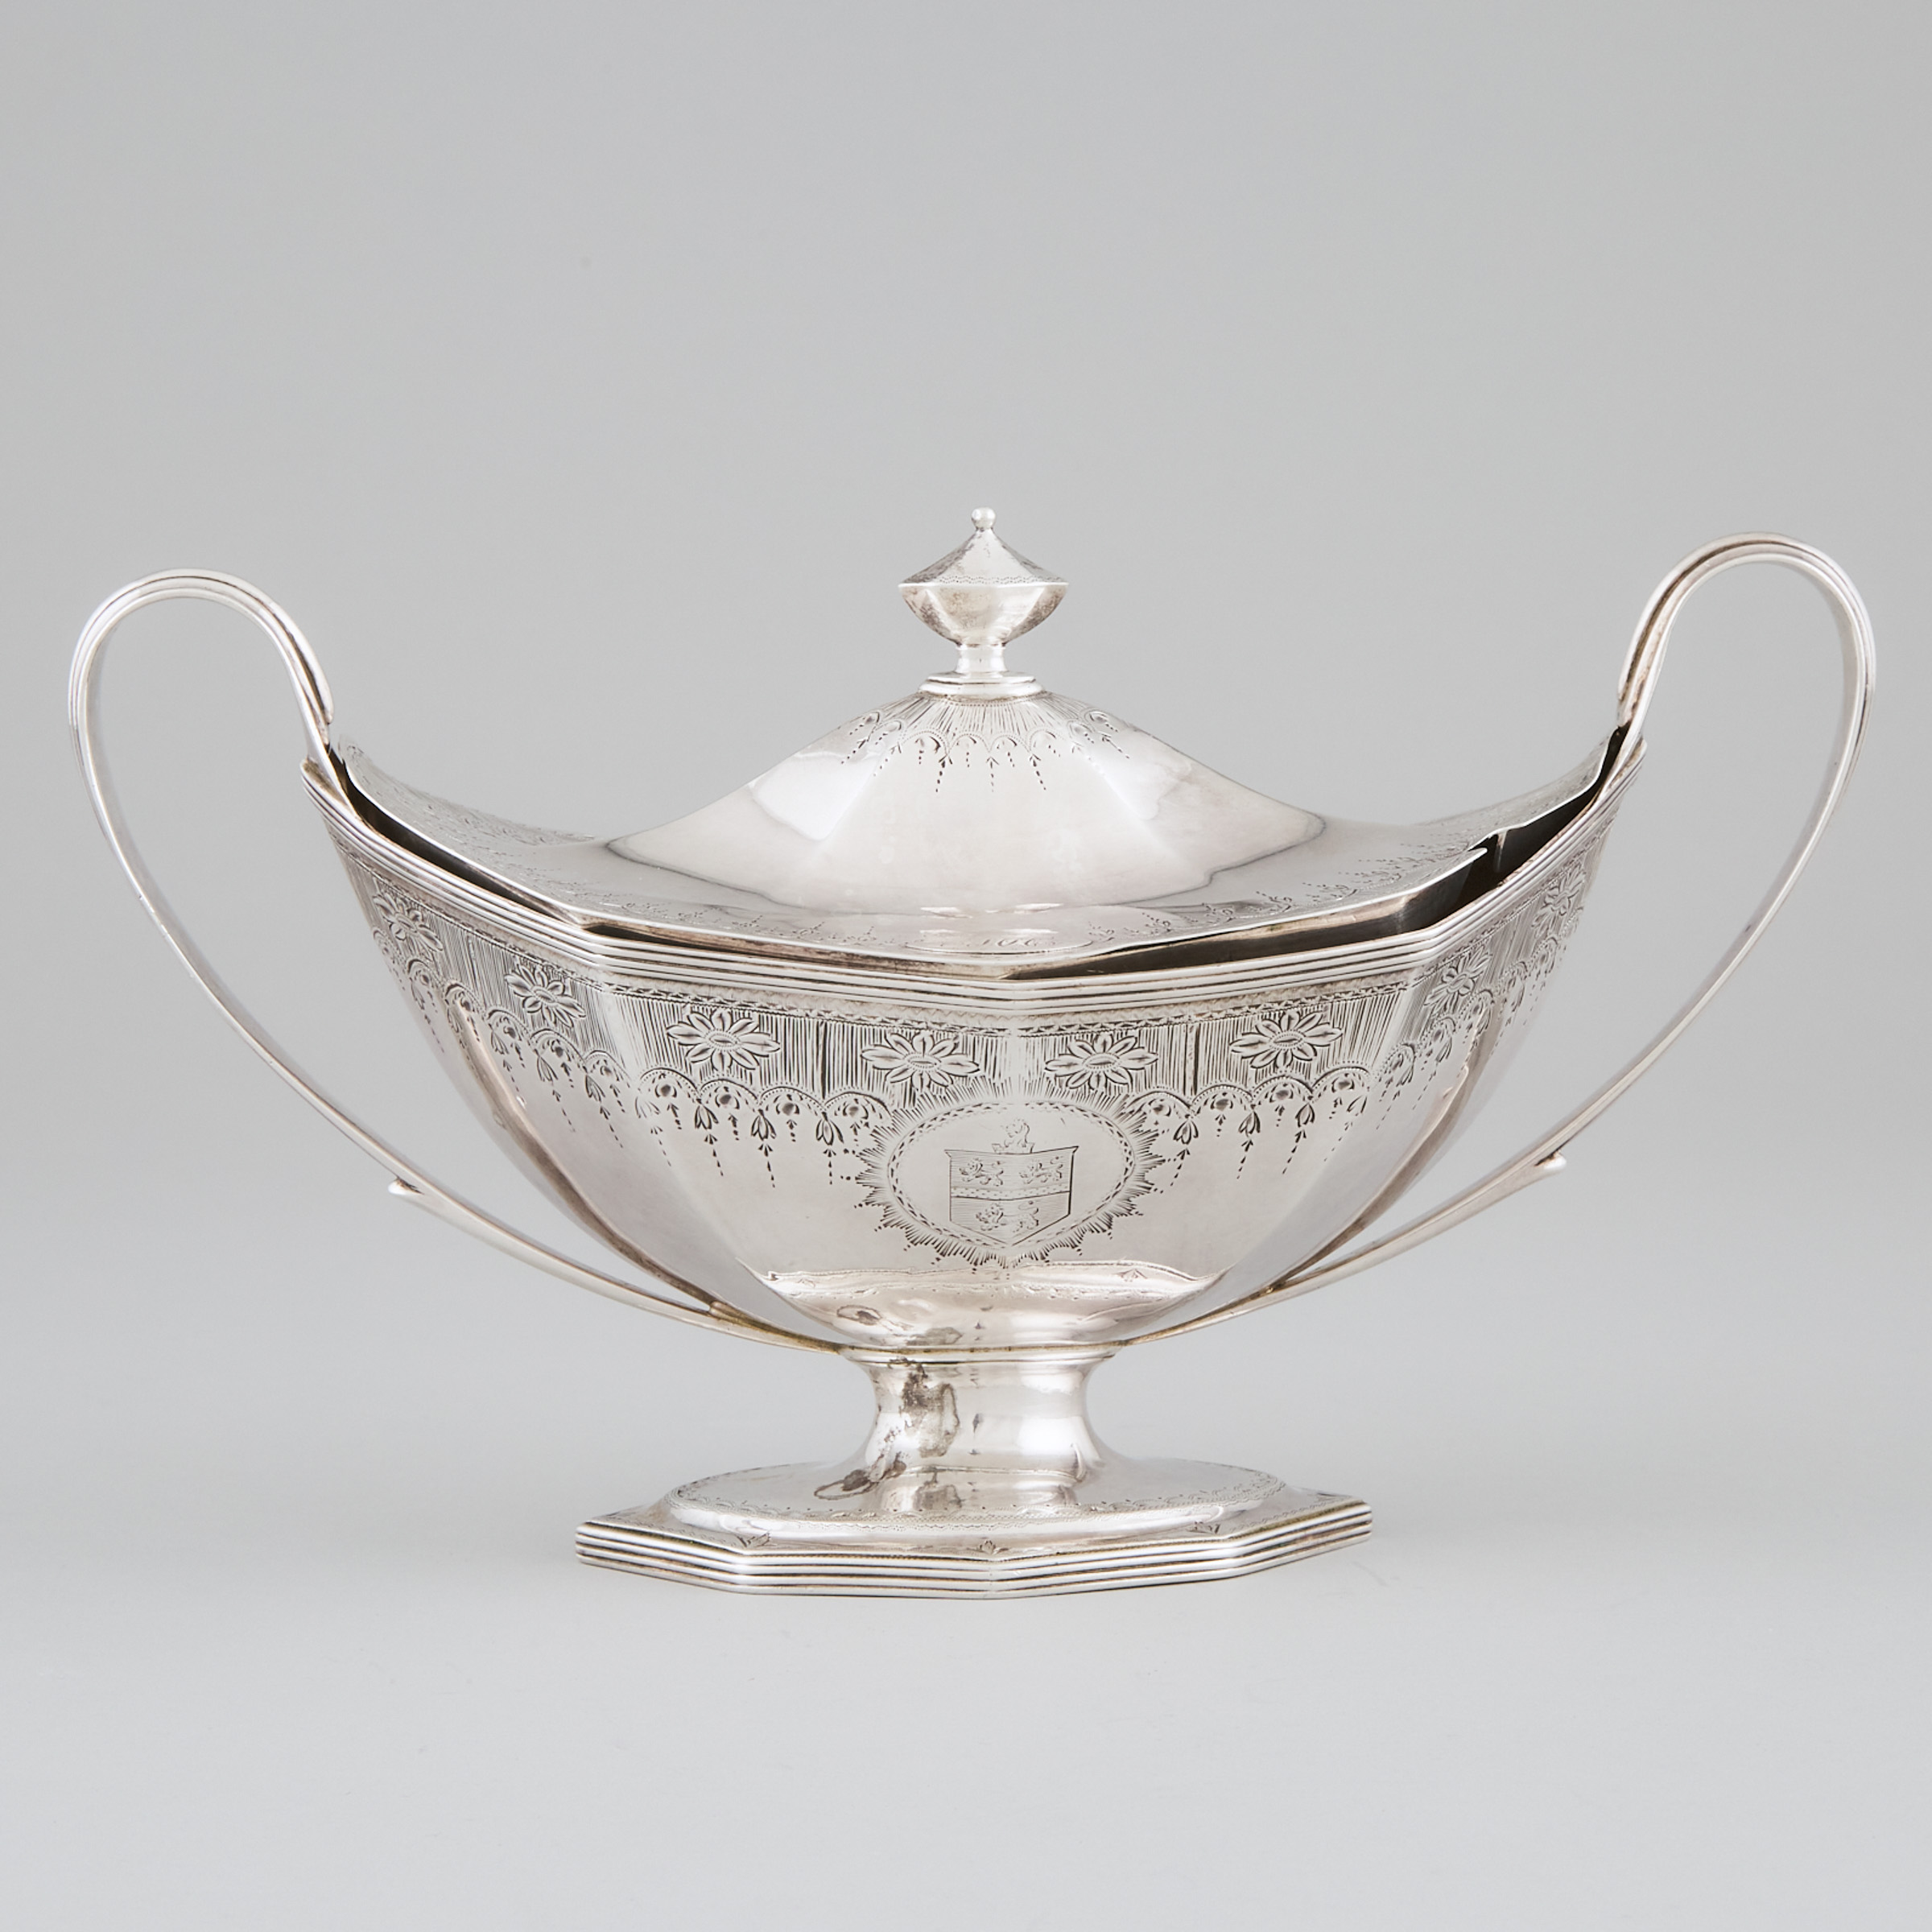 George III Silver Octagonal Covered Sauce Boat, London, 1788